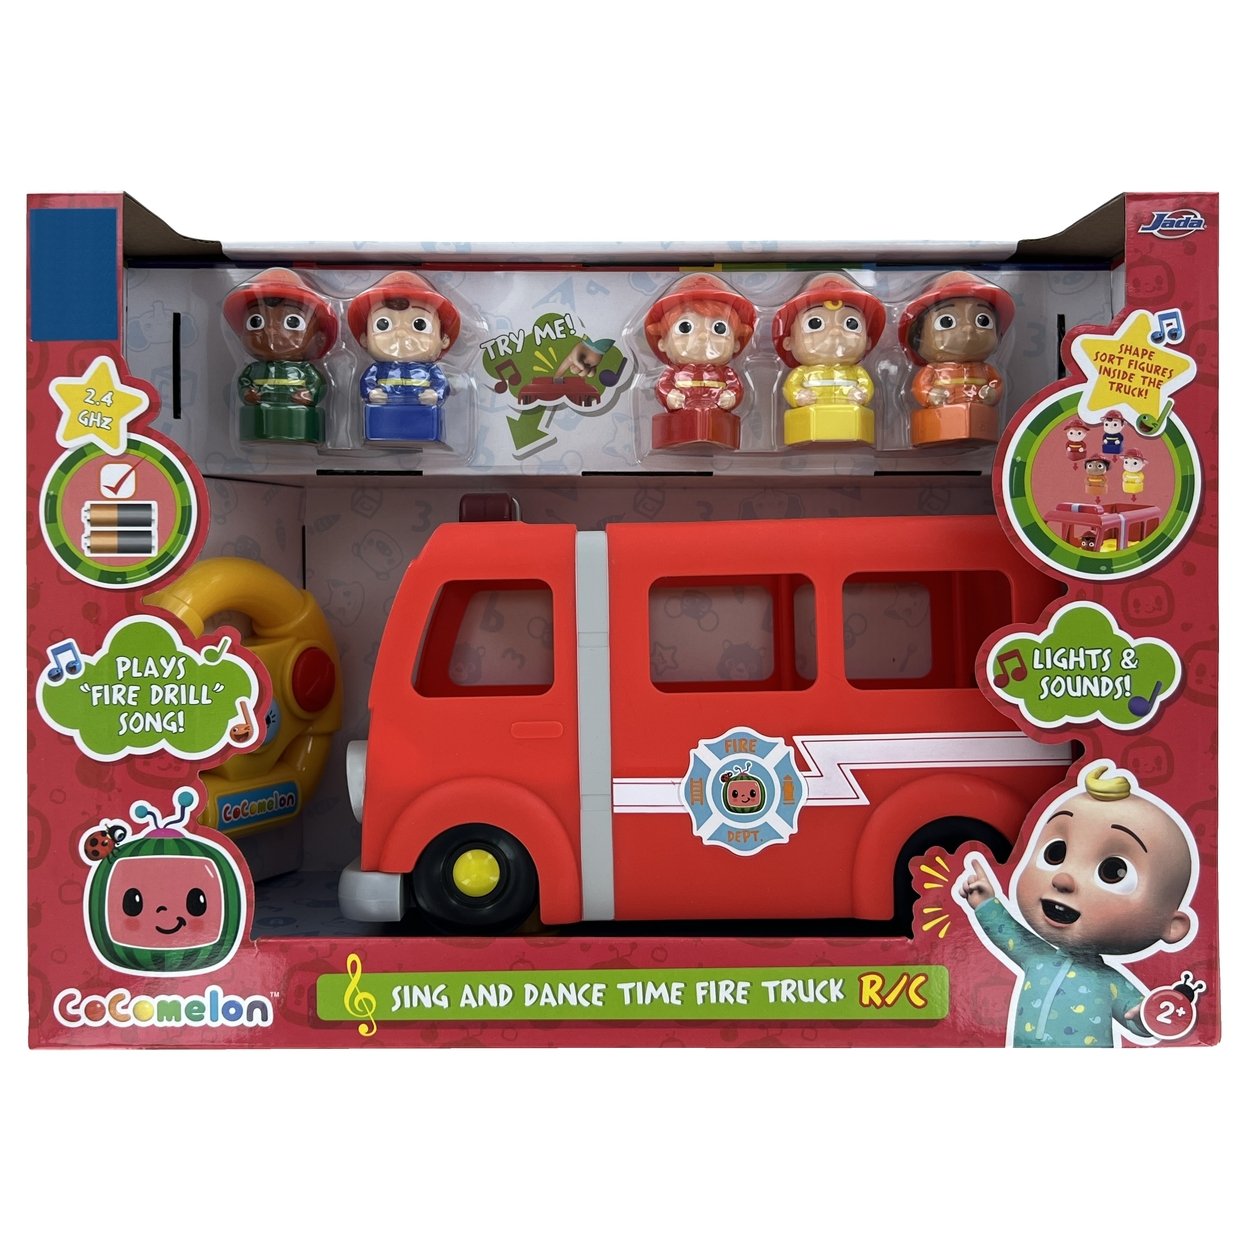 Cocomelon   Sing and Dance Time Fire Truck RC